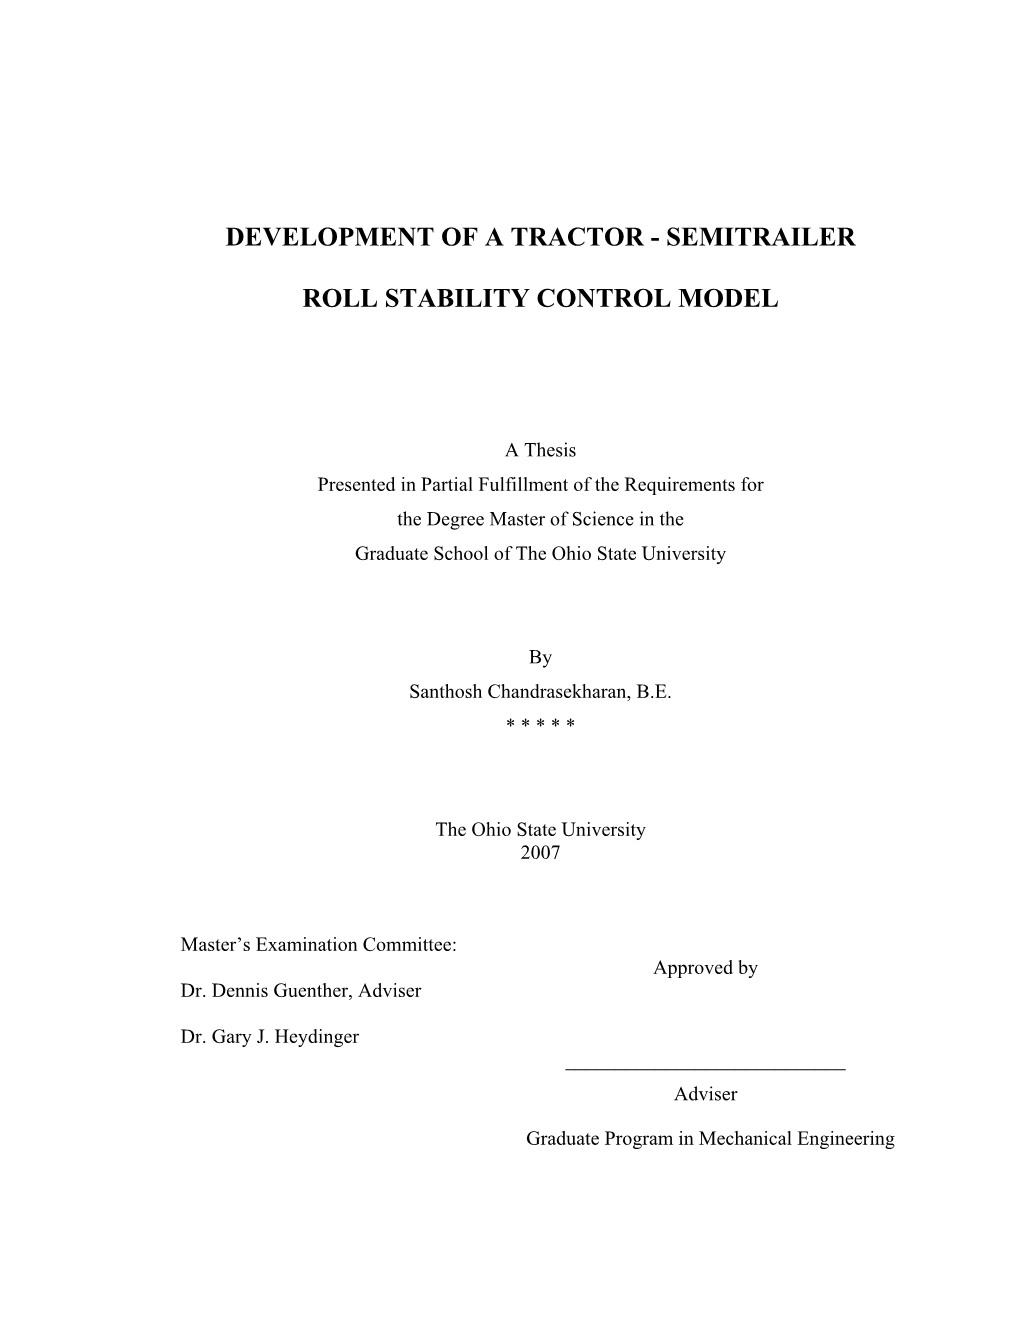 Development of a Tractor-Semitrailer Roll Stability Control Model